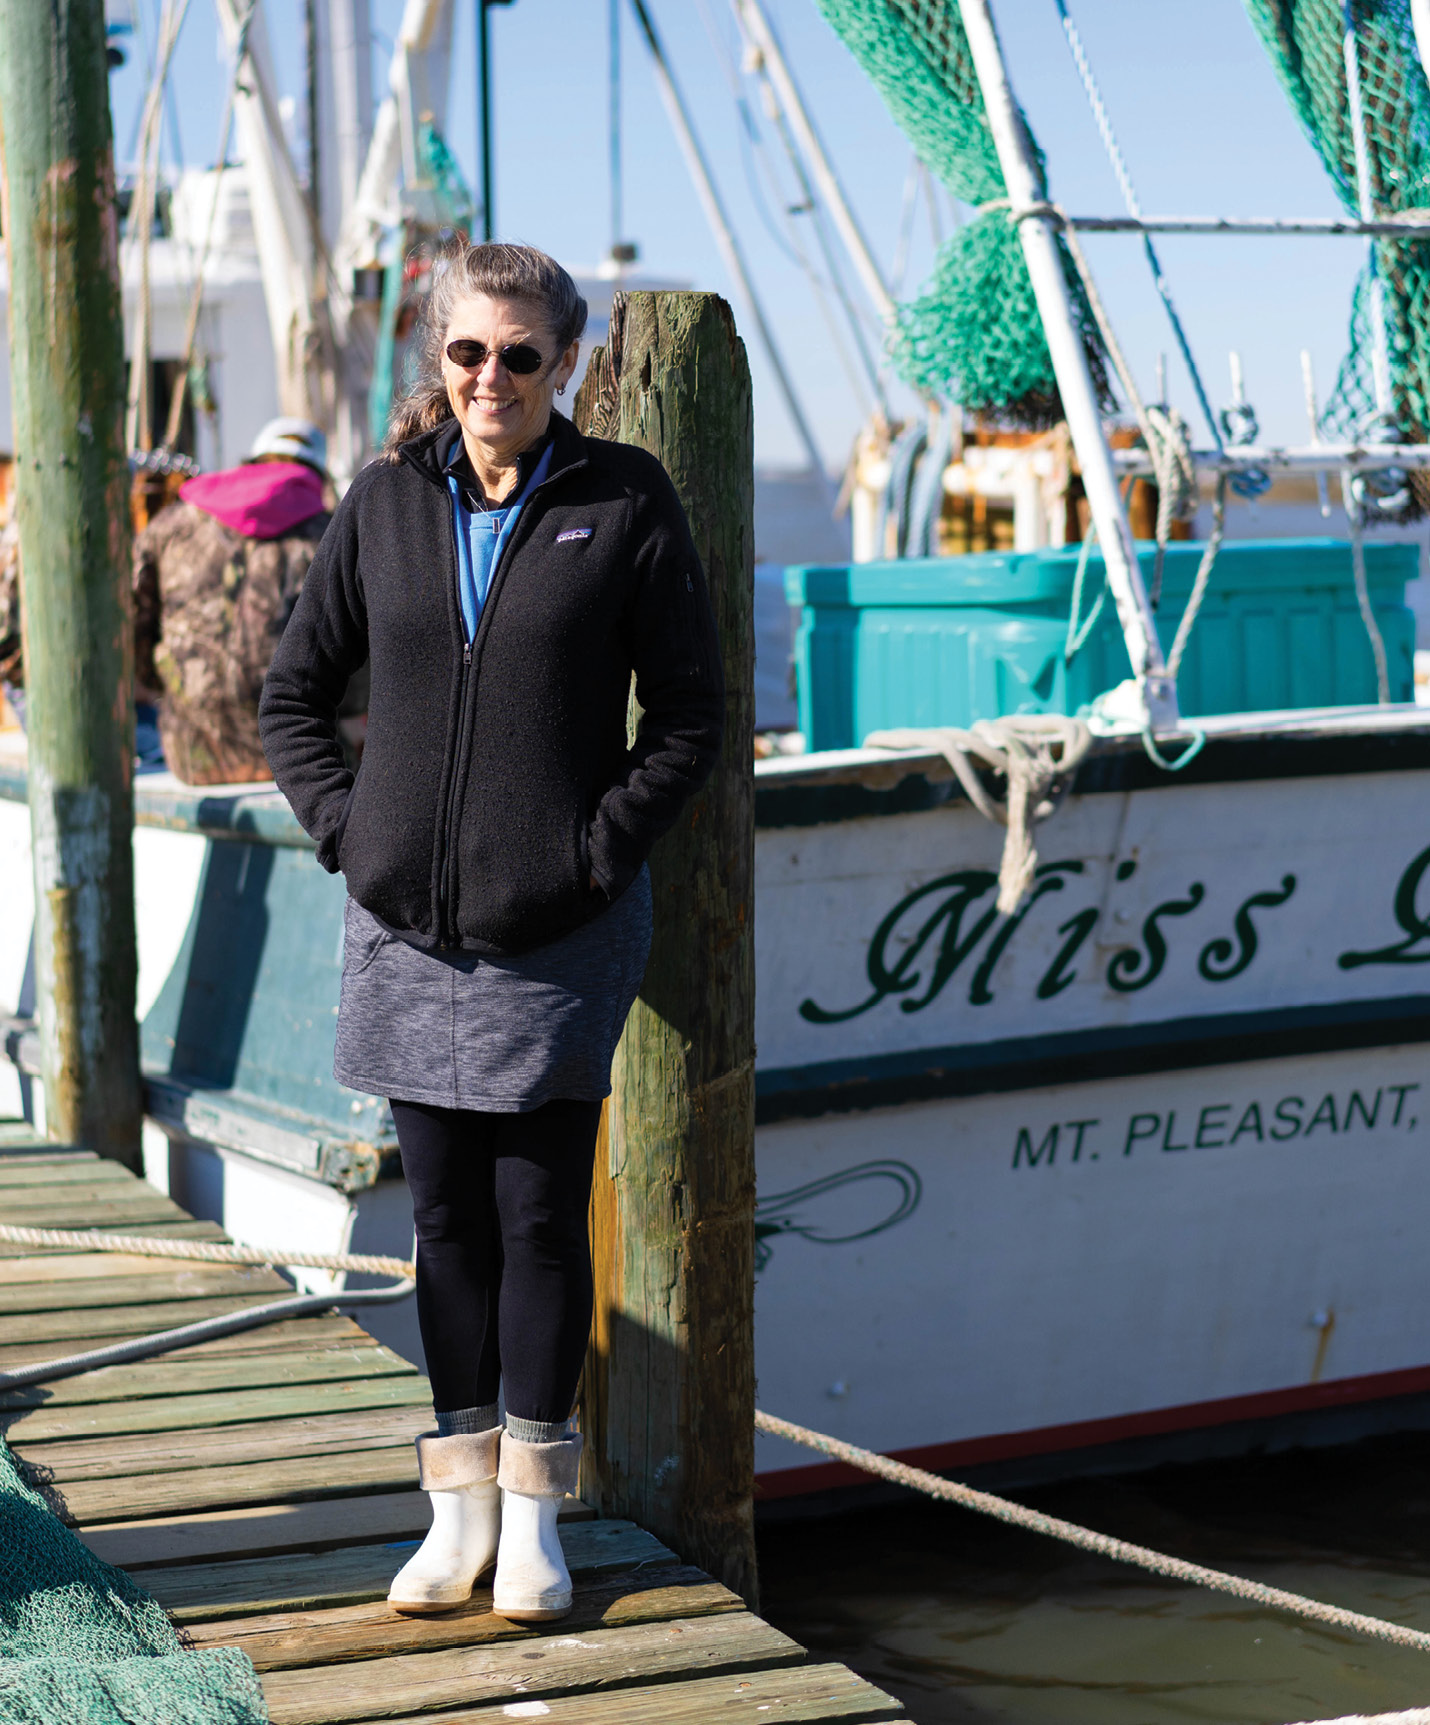 Cindy Tarvin beside the classic wooden trawler that she and her husband bought in late 2011